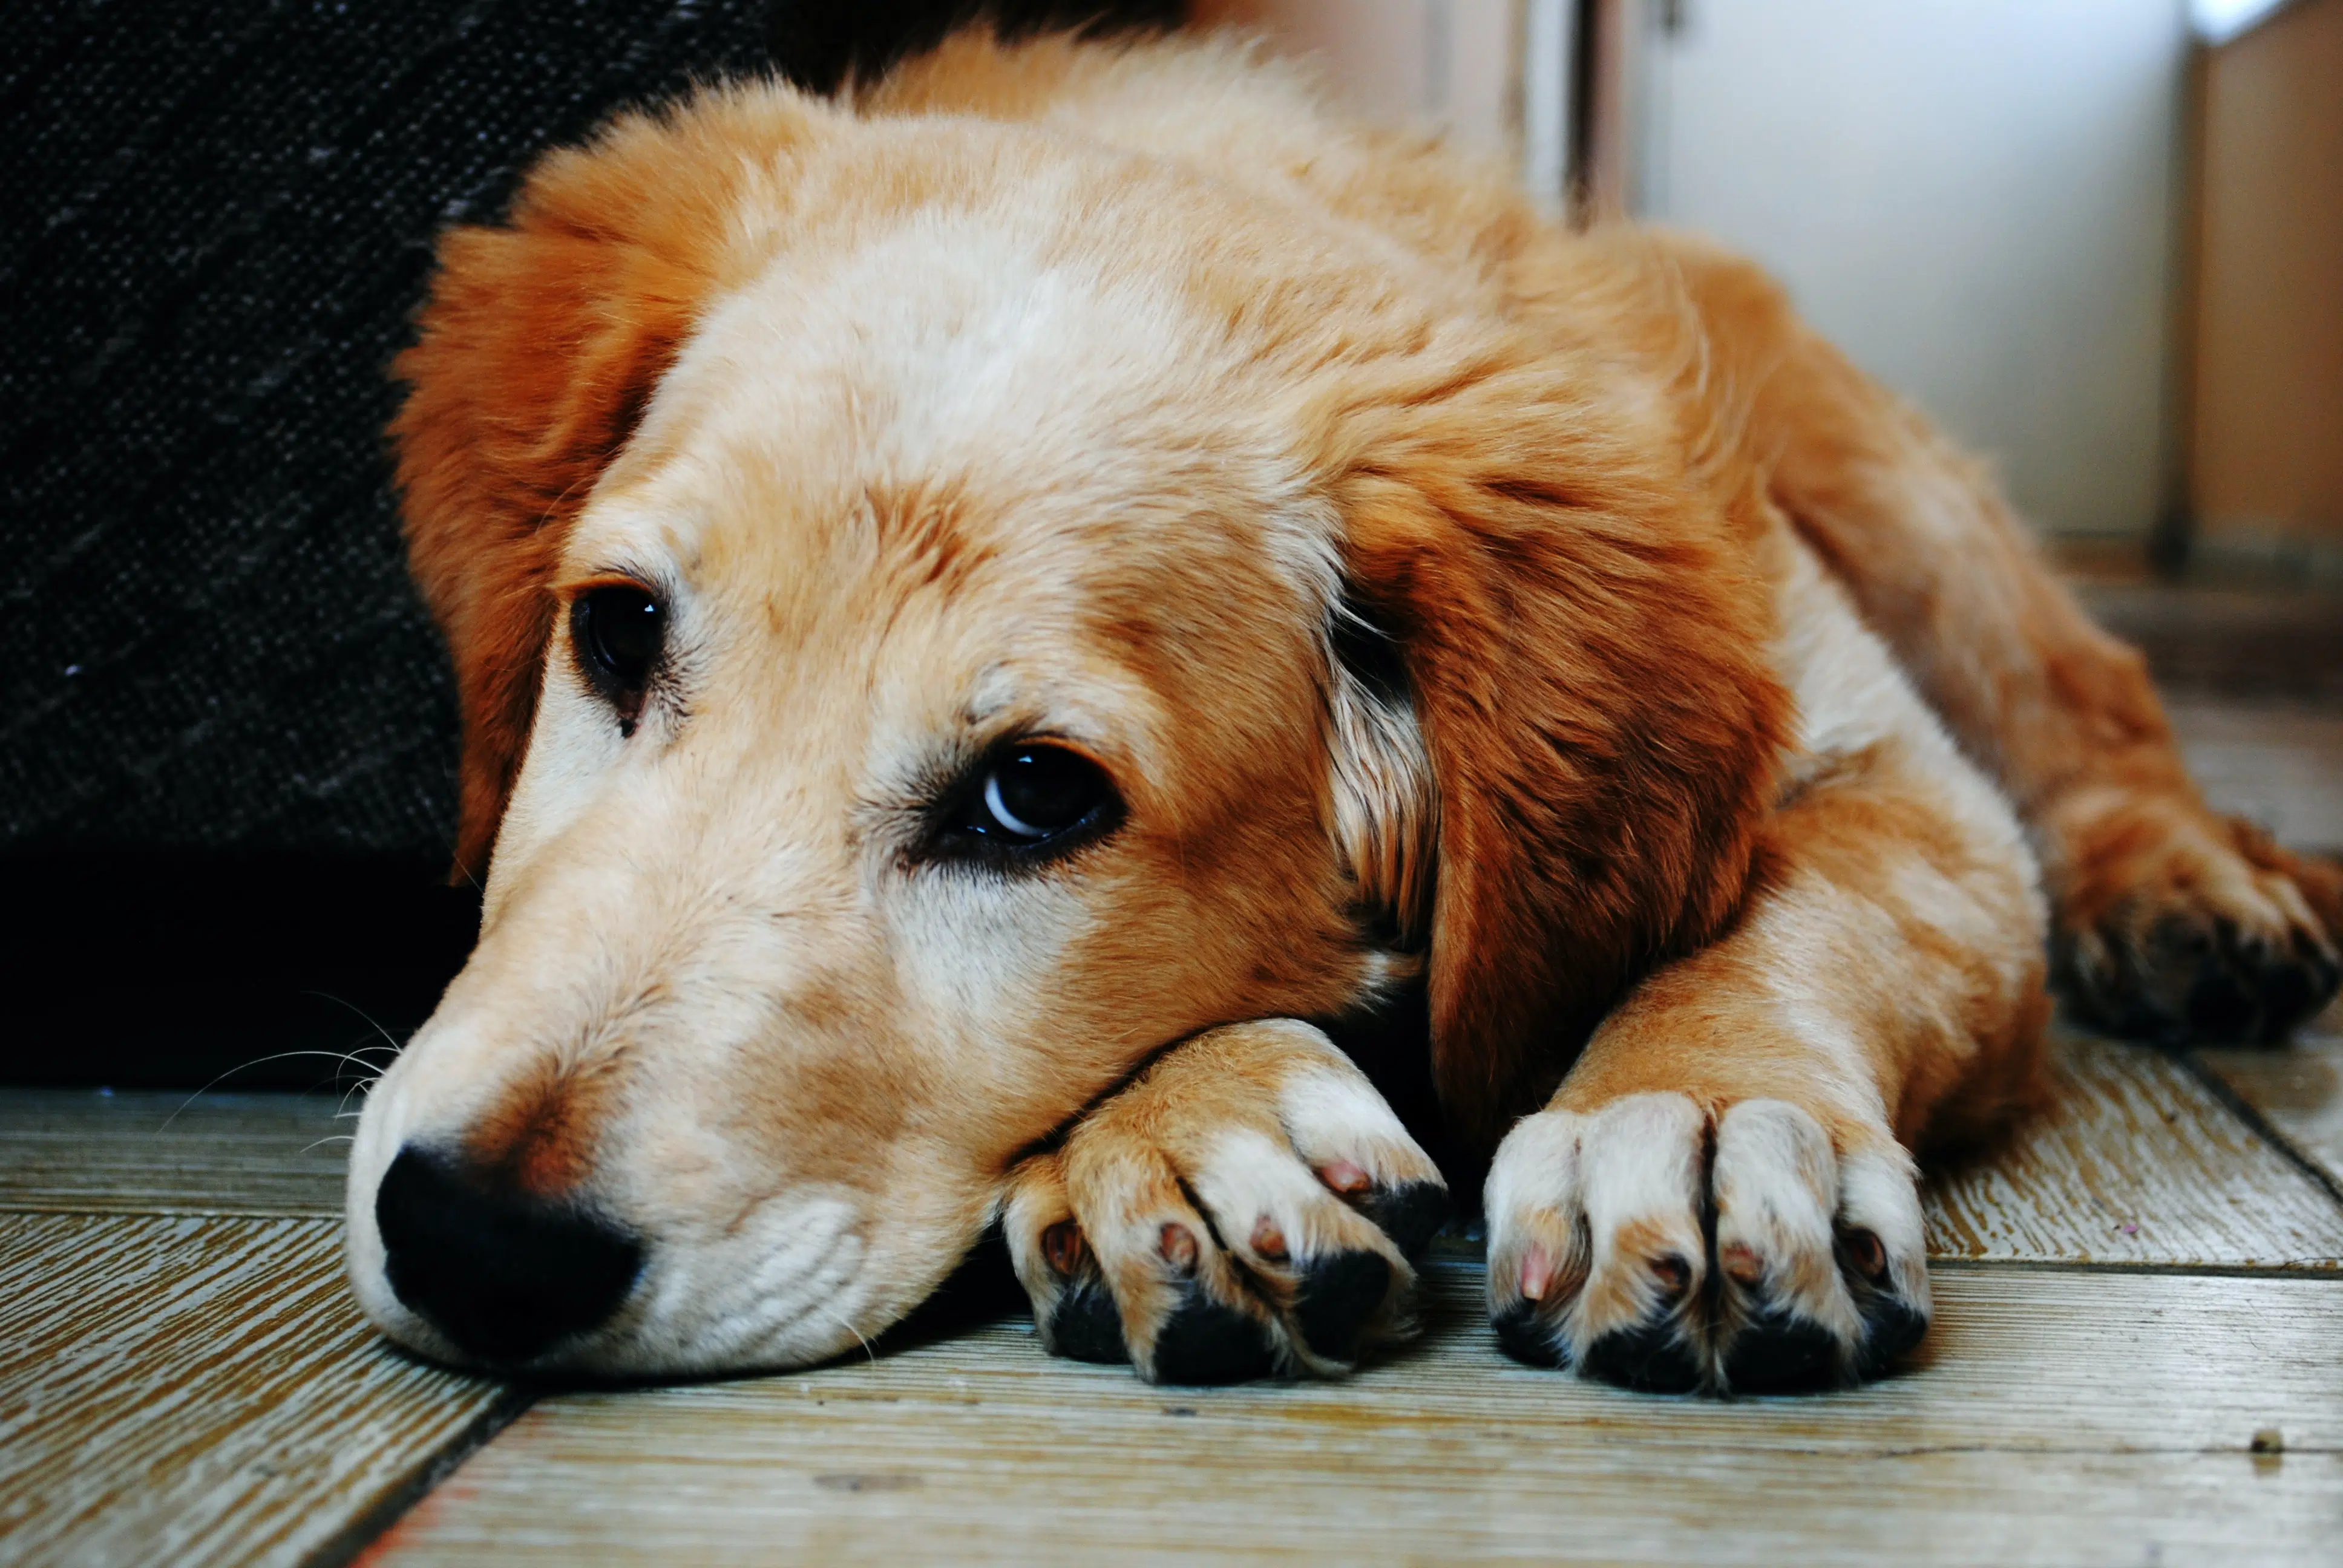 Do dogs cry to show sadness or happy dog tears?